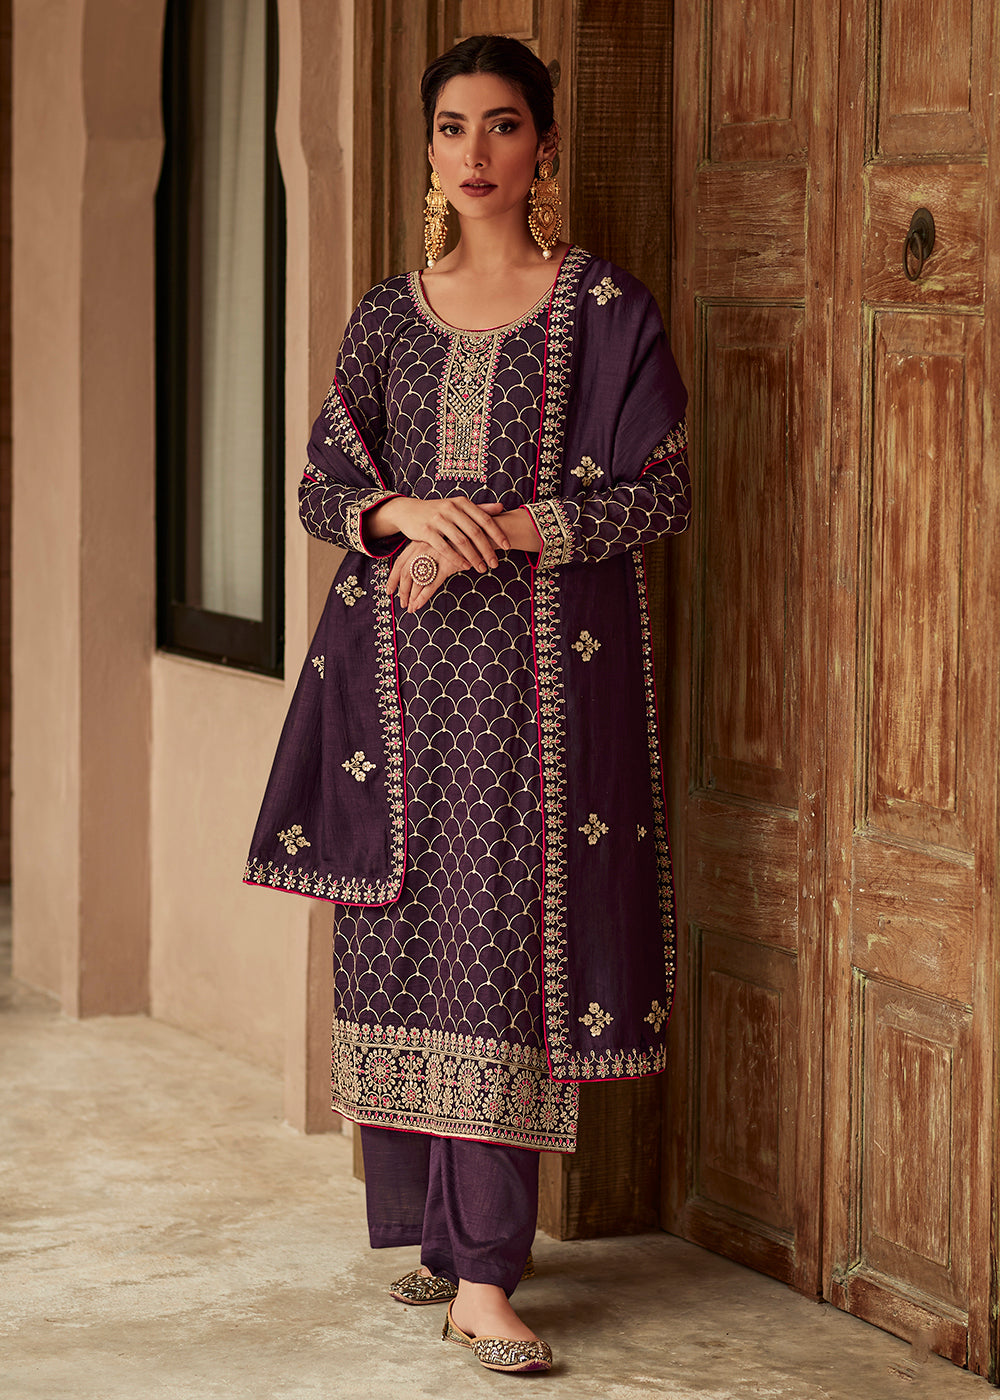 Buy Now Premium Silk Purple & Gold Embroidered Indian Salwar Kameez Online in USA, UK, Canada & Worldwide at Empress Clothing. 